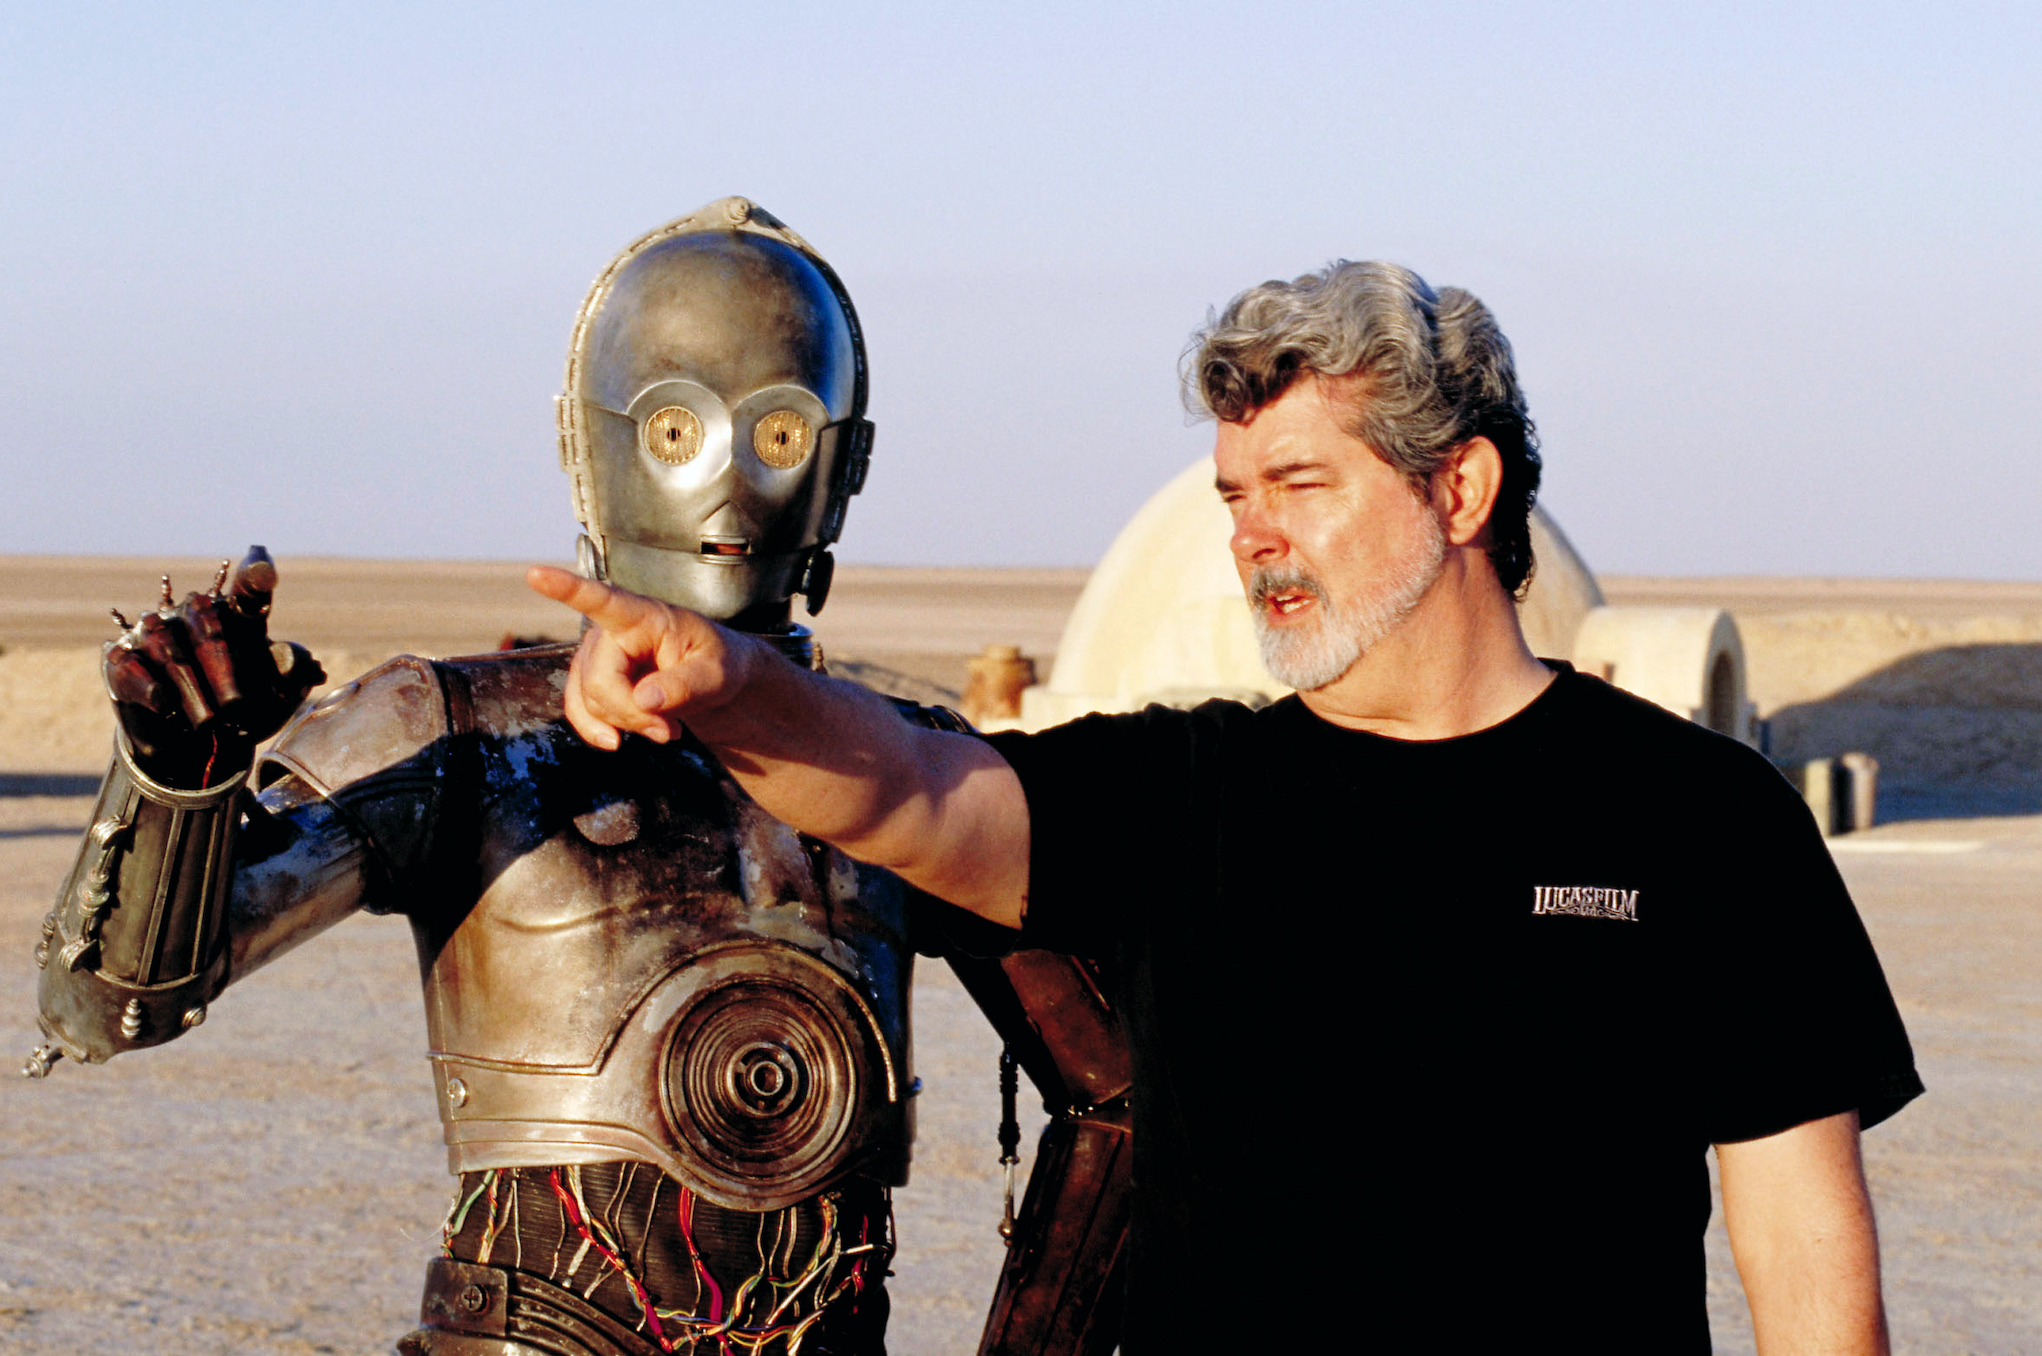 George Lucas behind-the-scenes on the film set (Credits: IndieWire)